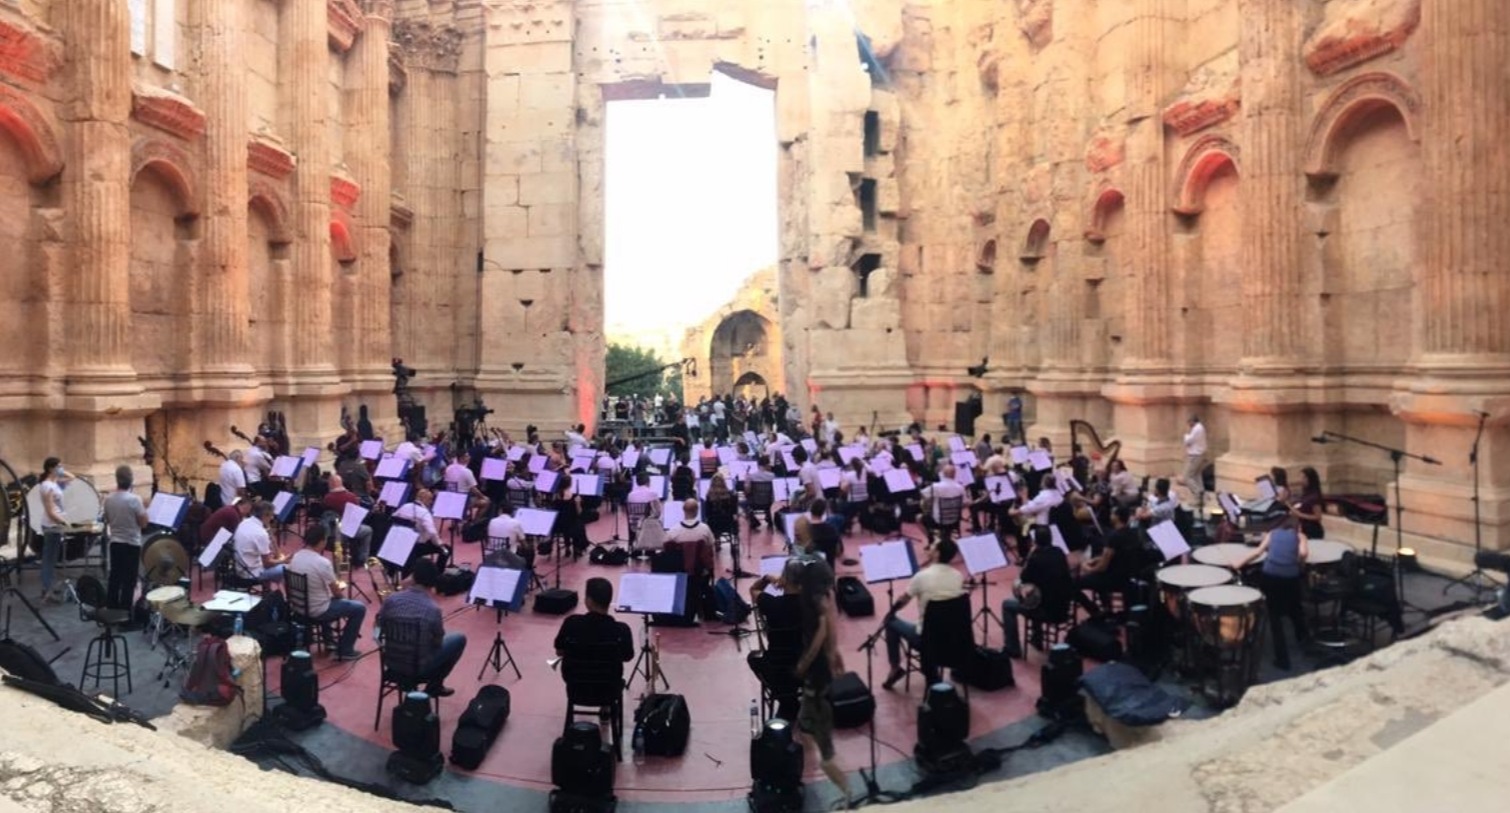 Entertainment News Roundup: Just one concert at Baalbek Music Festival; Ennio Morricone dies aged 91 and more